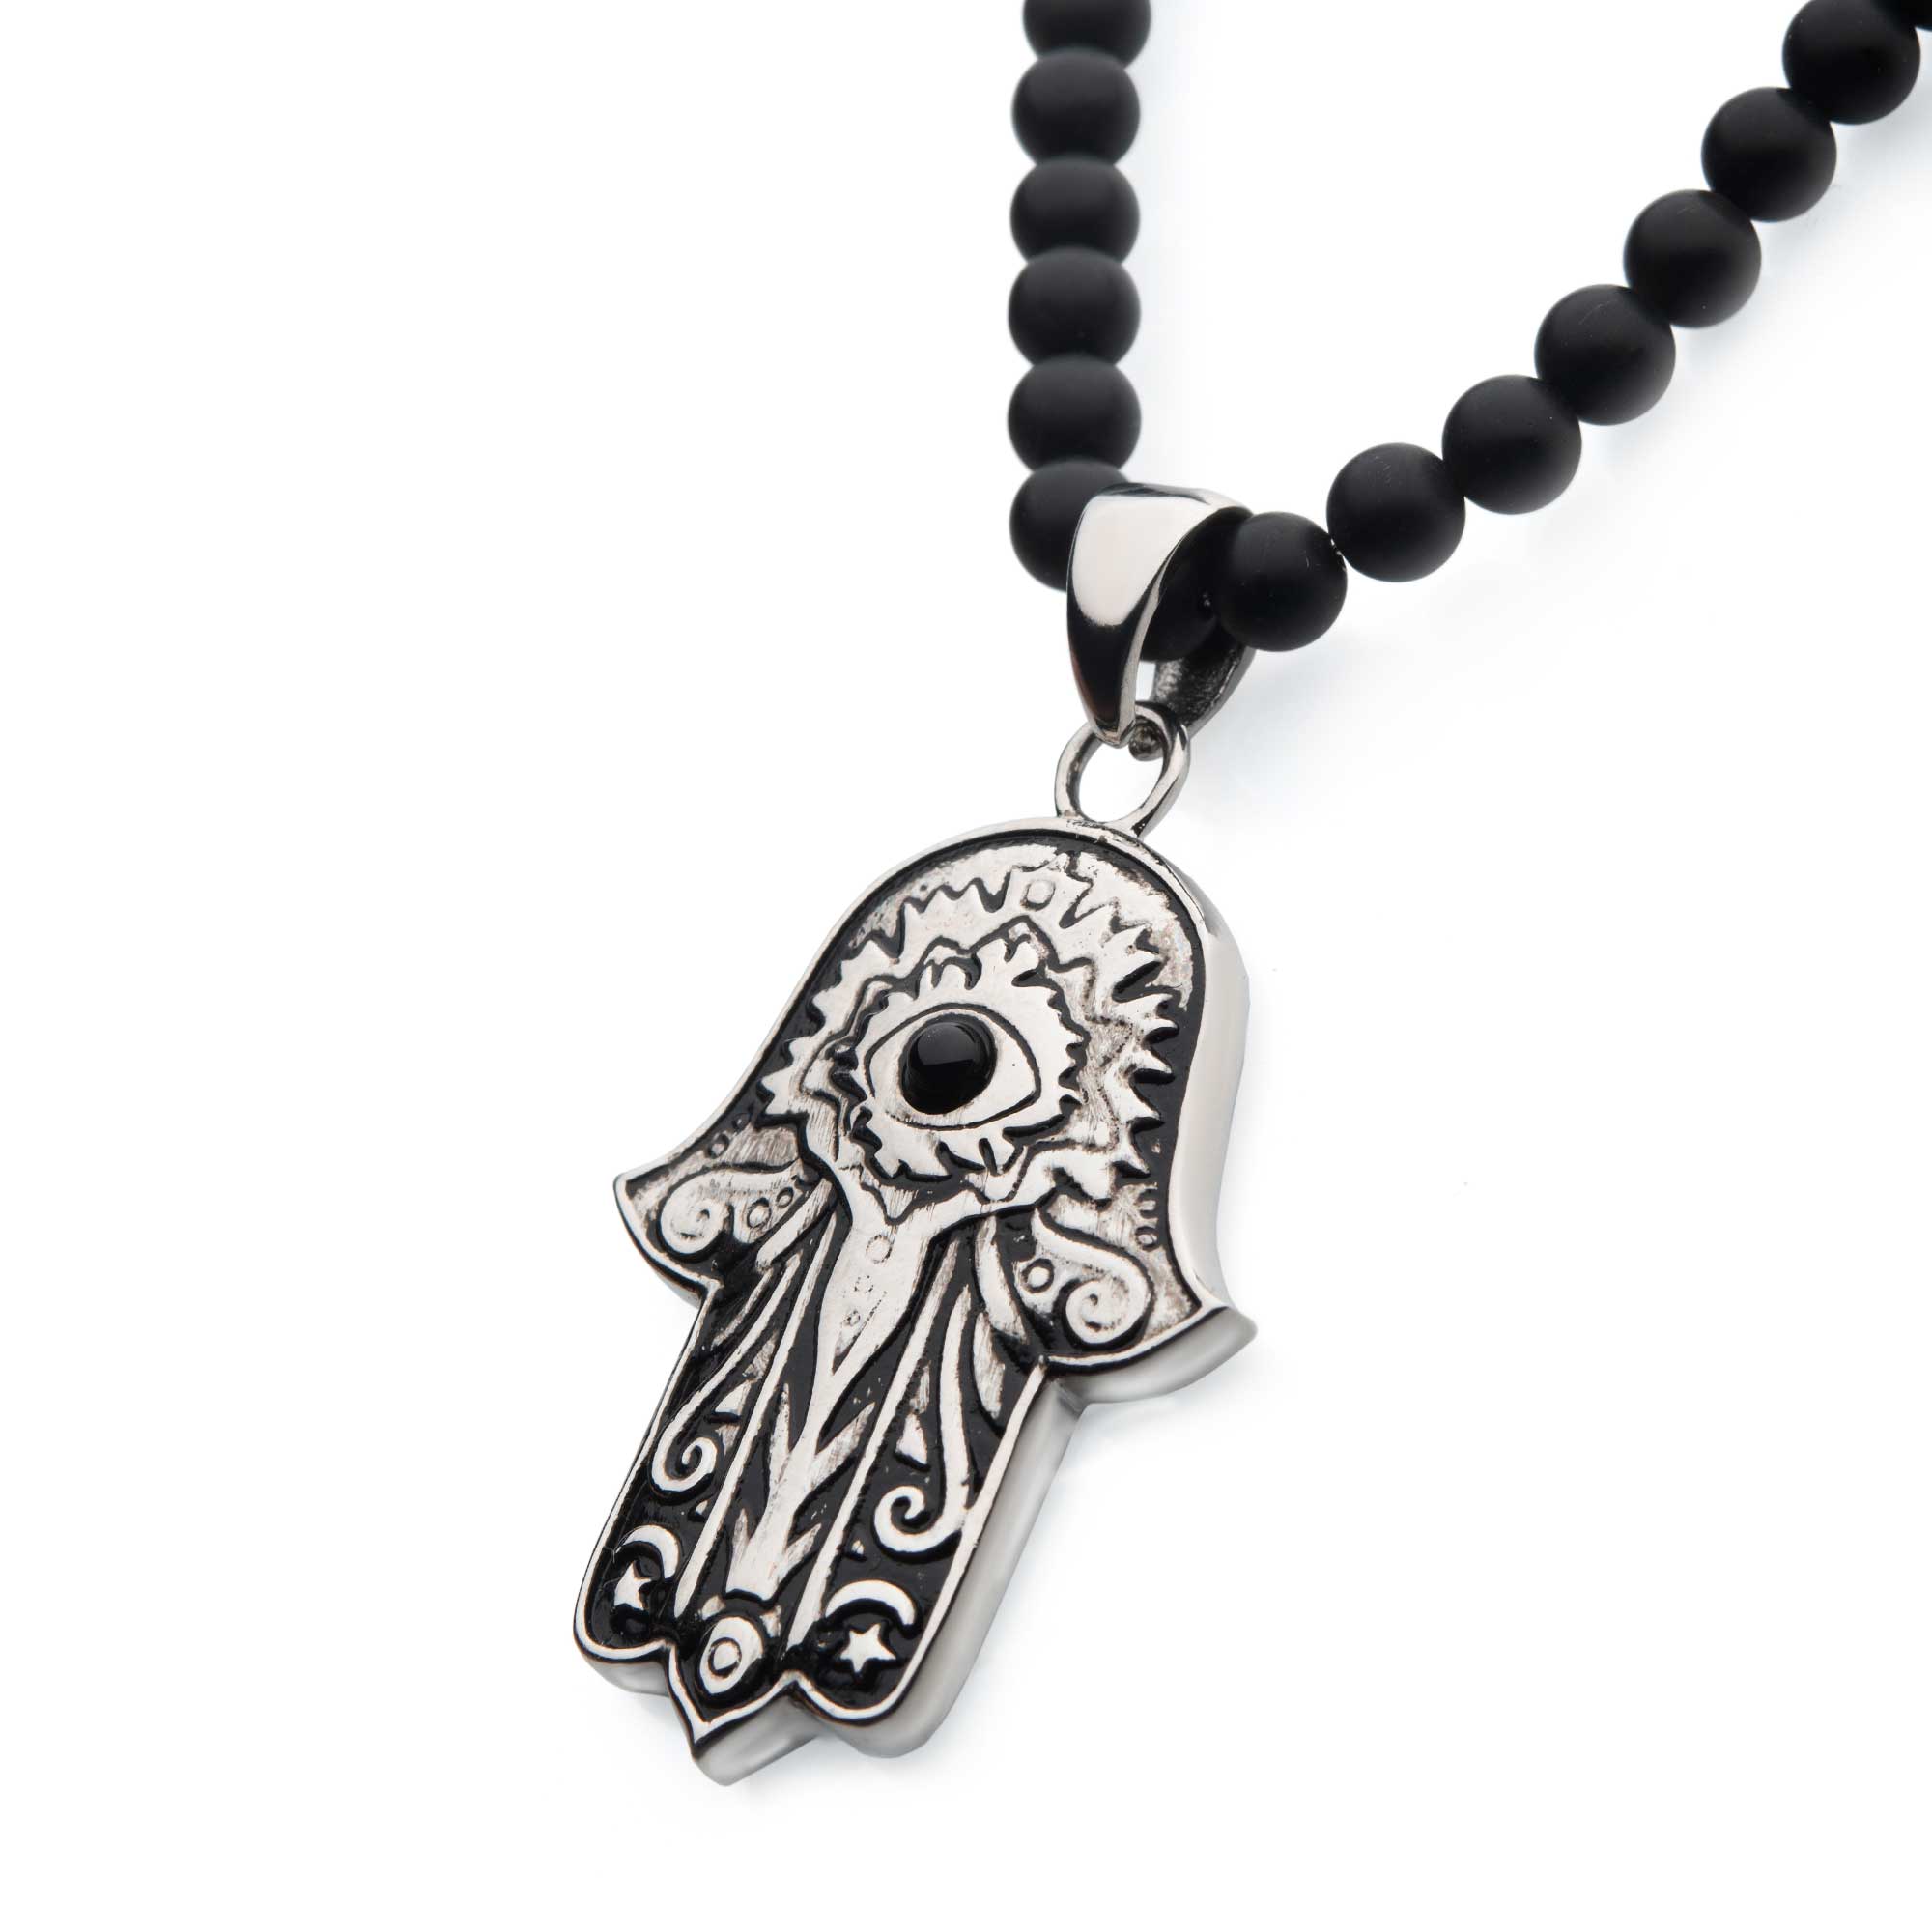 Stainless Steel with Centerpiece Black Agate Stone Hamsa Pendant, with Black Agate Stone Bead Necklace Image 2 P.K. Bennett Jewelers Mundelein, IL